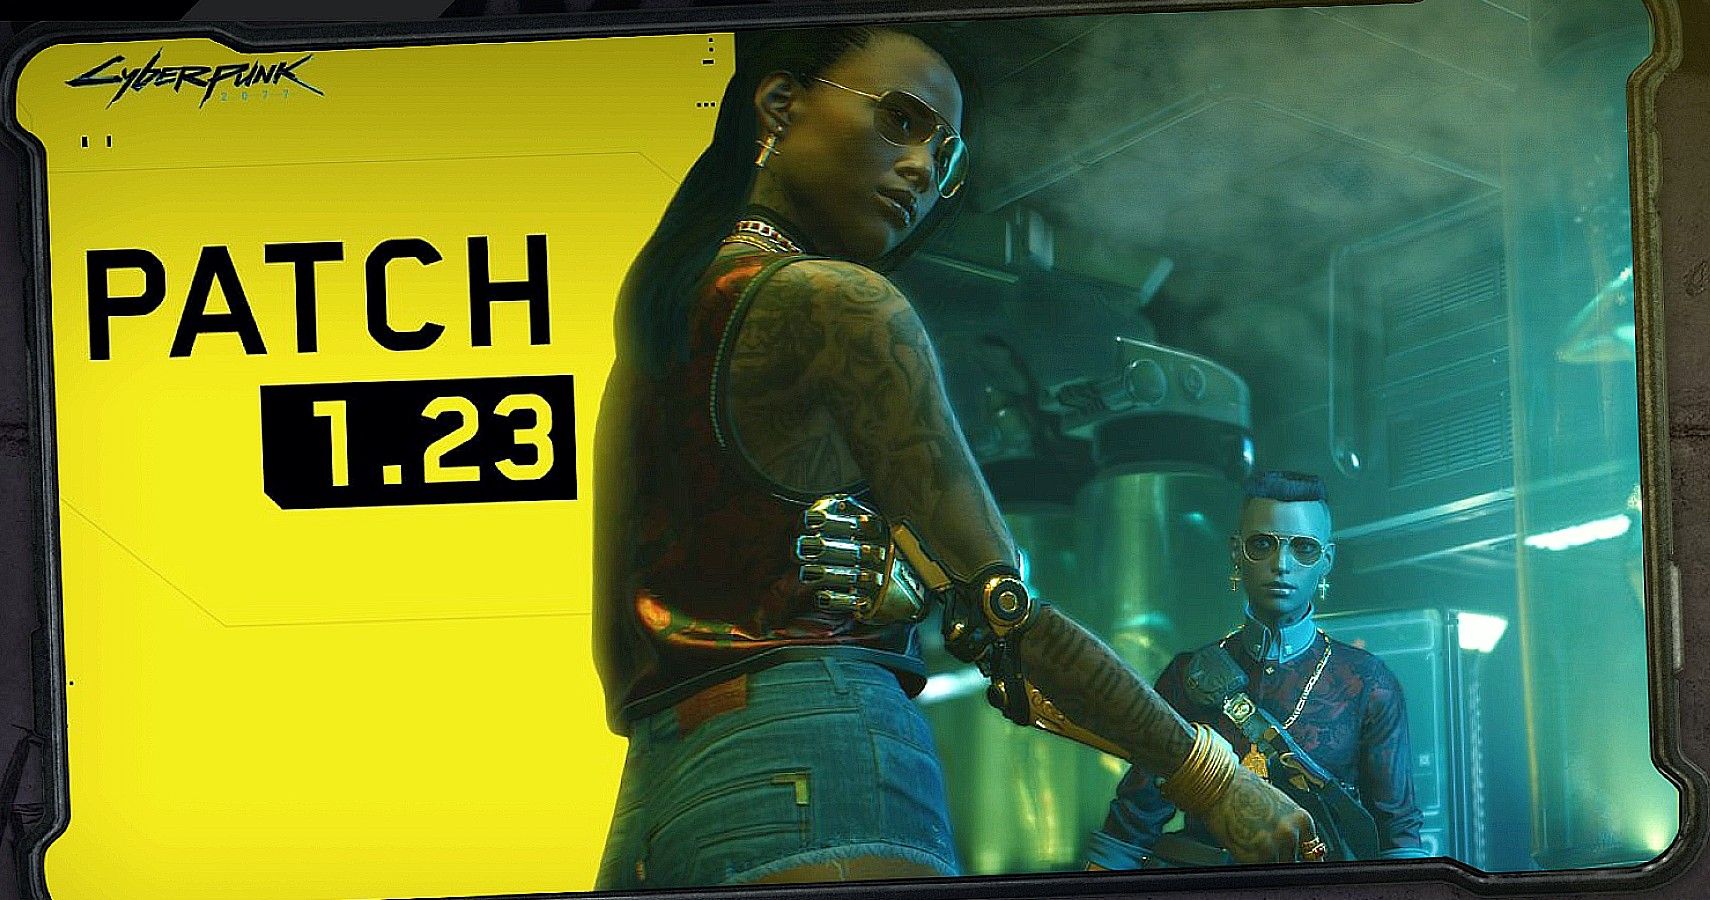 Cyberpunk 2077 Gets New Patch 123 Just Prior To Returning To PS Store